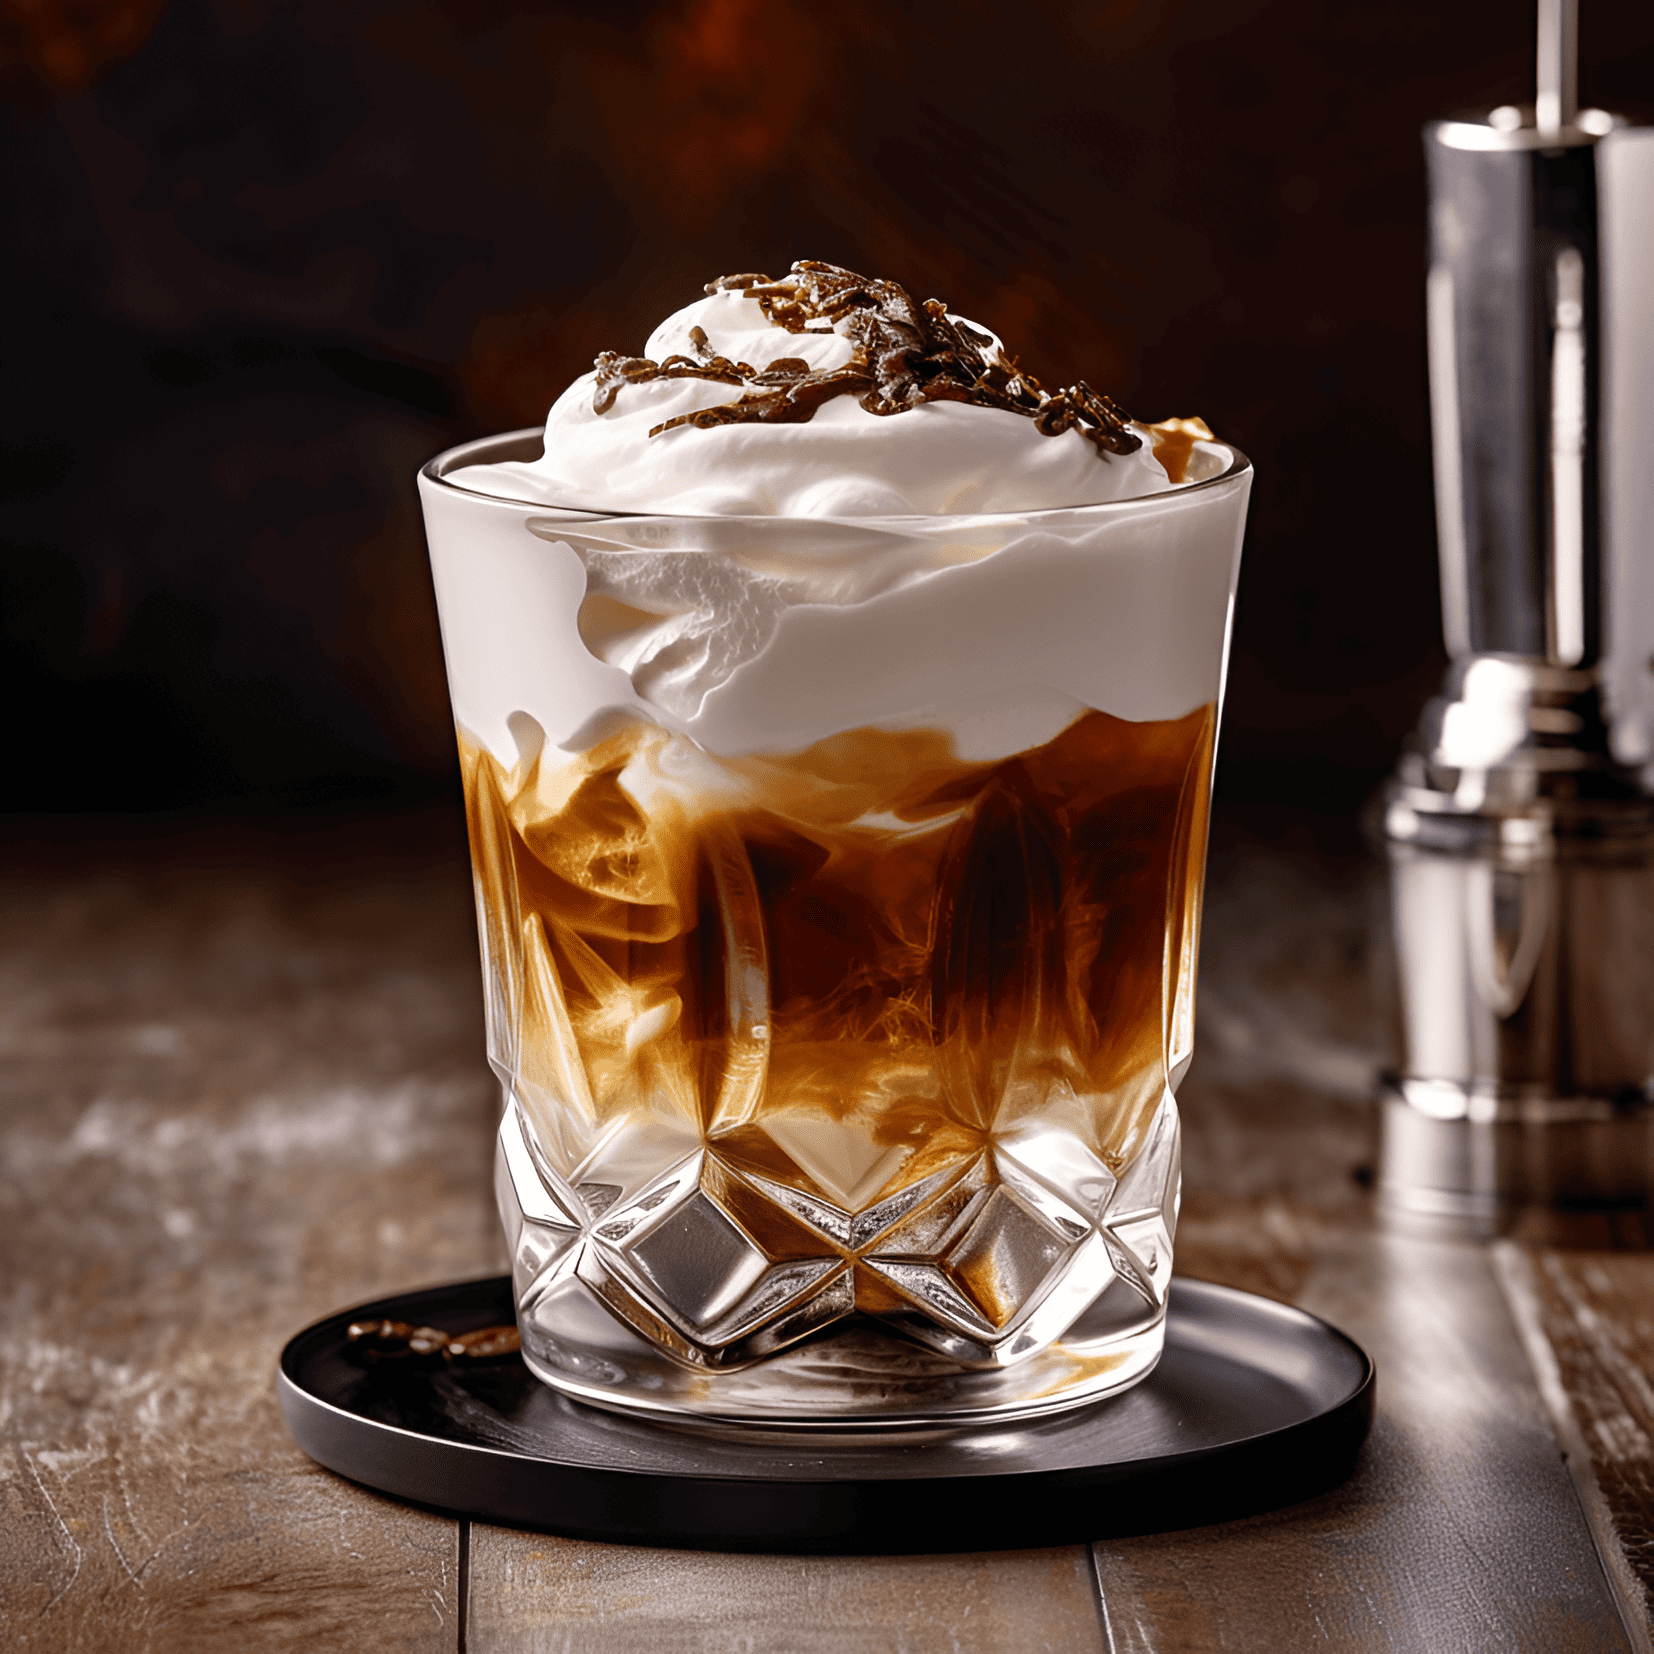 Colorado Bulldog Cocktail Recipe - The Colorado Bulldog has a rich, creamy, and sweet taste with a subtle coffee undertone. The combination of vodka, coffee liqueur, and cola adds a slightly effervescent and refreshing twist to the drink, making it a delightful and indulgent treat.